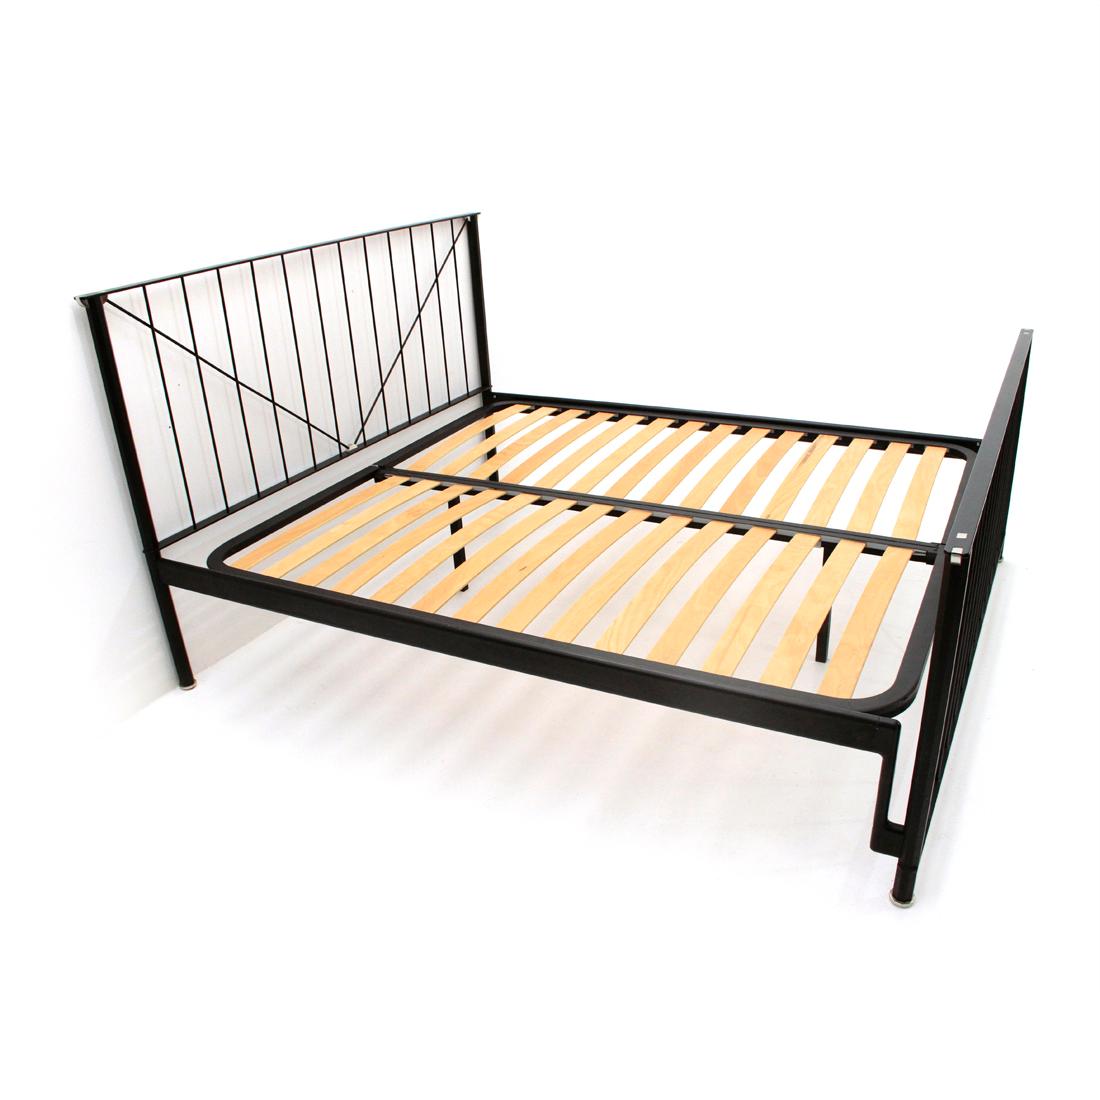 Bed produced in the 1980s by Riva Cantù.
Black painted metal structure with steel details.
Bent wooden slats.
Good general conditions, some signs due to normal use over time.

Dimensions: Width 182 cm, depth 207 cm and height 116 cm
Mattress